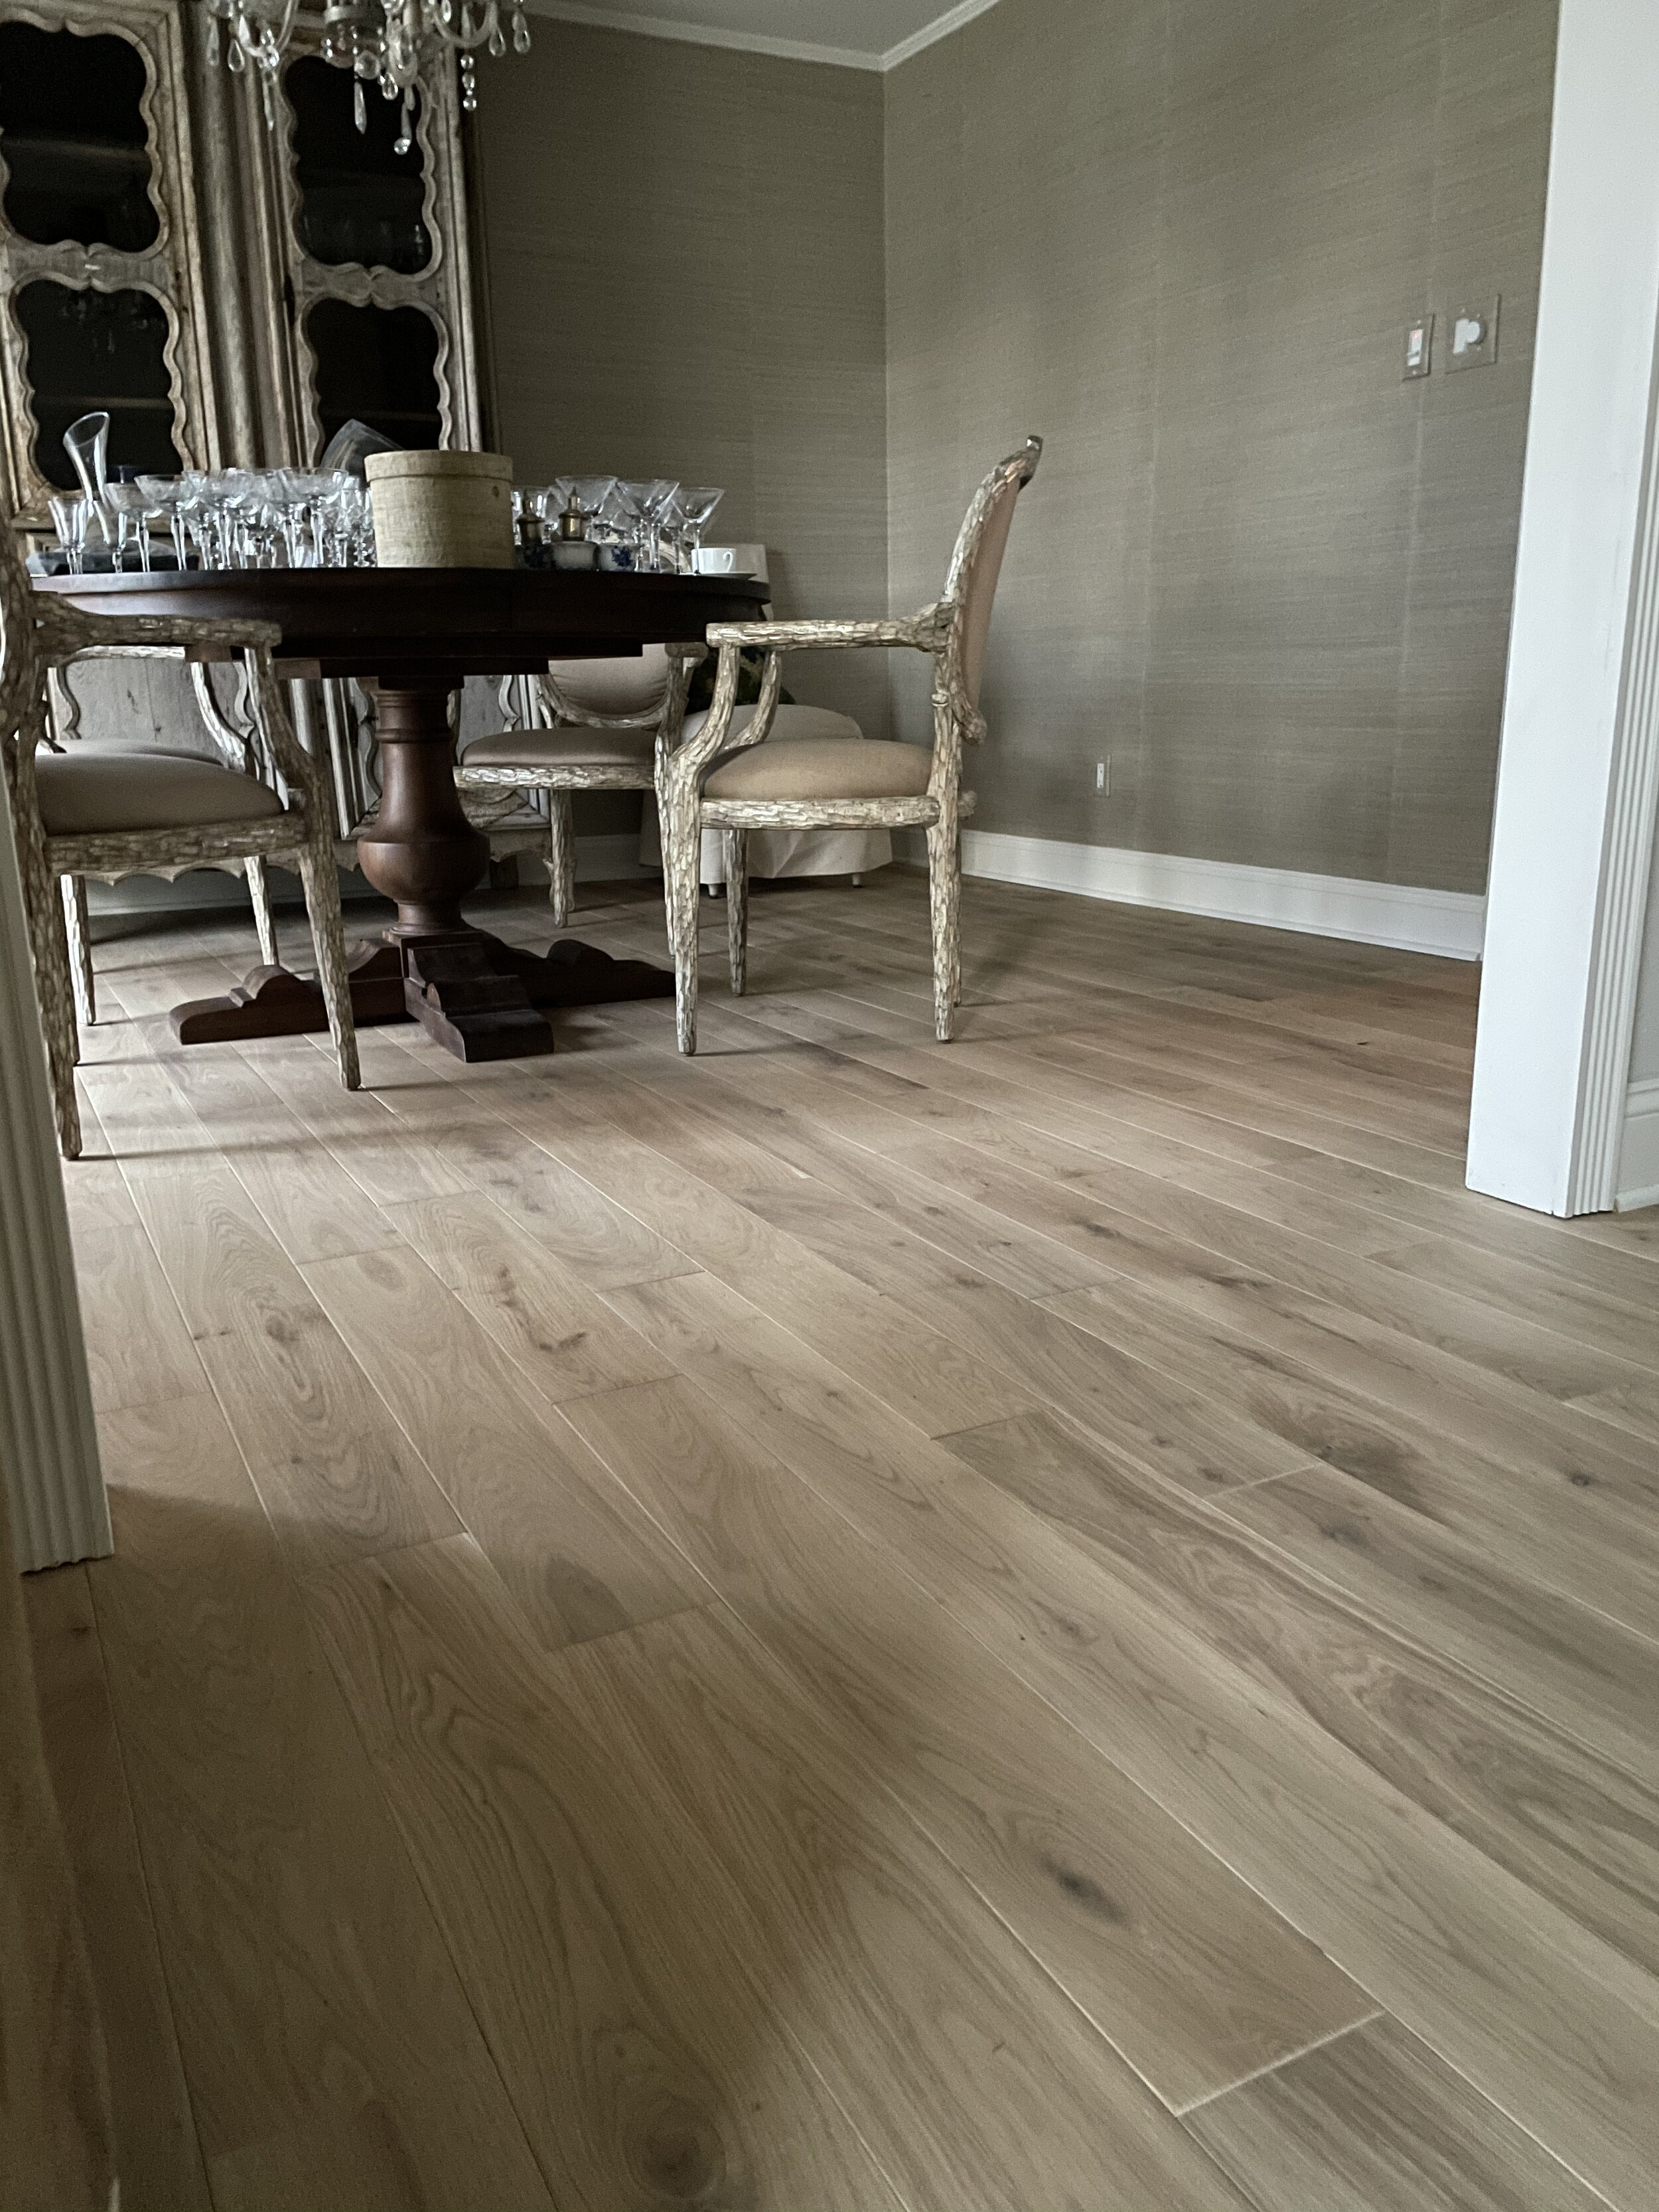 Paramount Flooring ‘Santa Cruz’ in ‘Antique’ in our connected sitting room and dining room